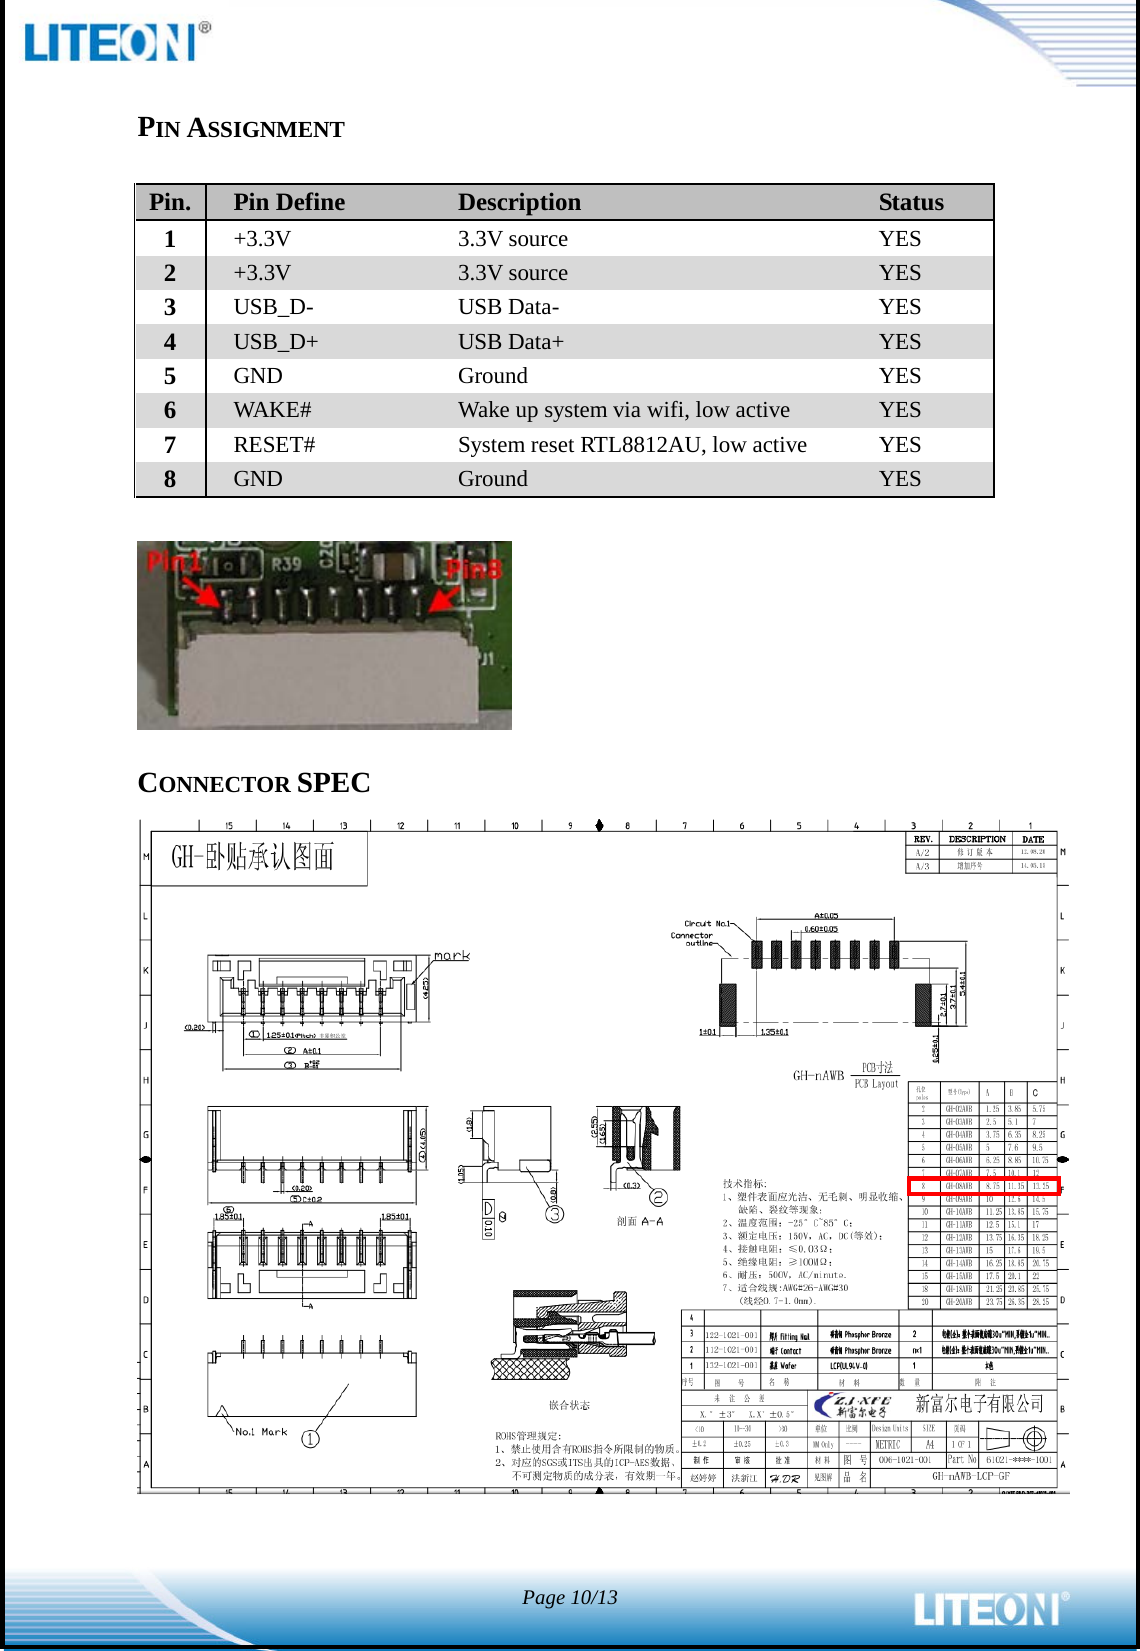  Page 10/13   PIN ASSIGNMENT  Pin. Pin Define Description Status 1 +3.3V  3.3V source YES 2 +3.3V 3.3V source YES 3 USB_D-  USB Data-  YES 4 USB_D+ USB Data+ YES 5 GND  Ground  YES 6 WAKE# Wake up system via wifi, low active YES 7 RESET#  System reset RTL8812AU, low active  YES 8 GND Ground YES    CONNECTOR SPEC  